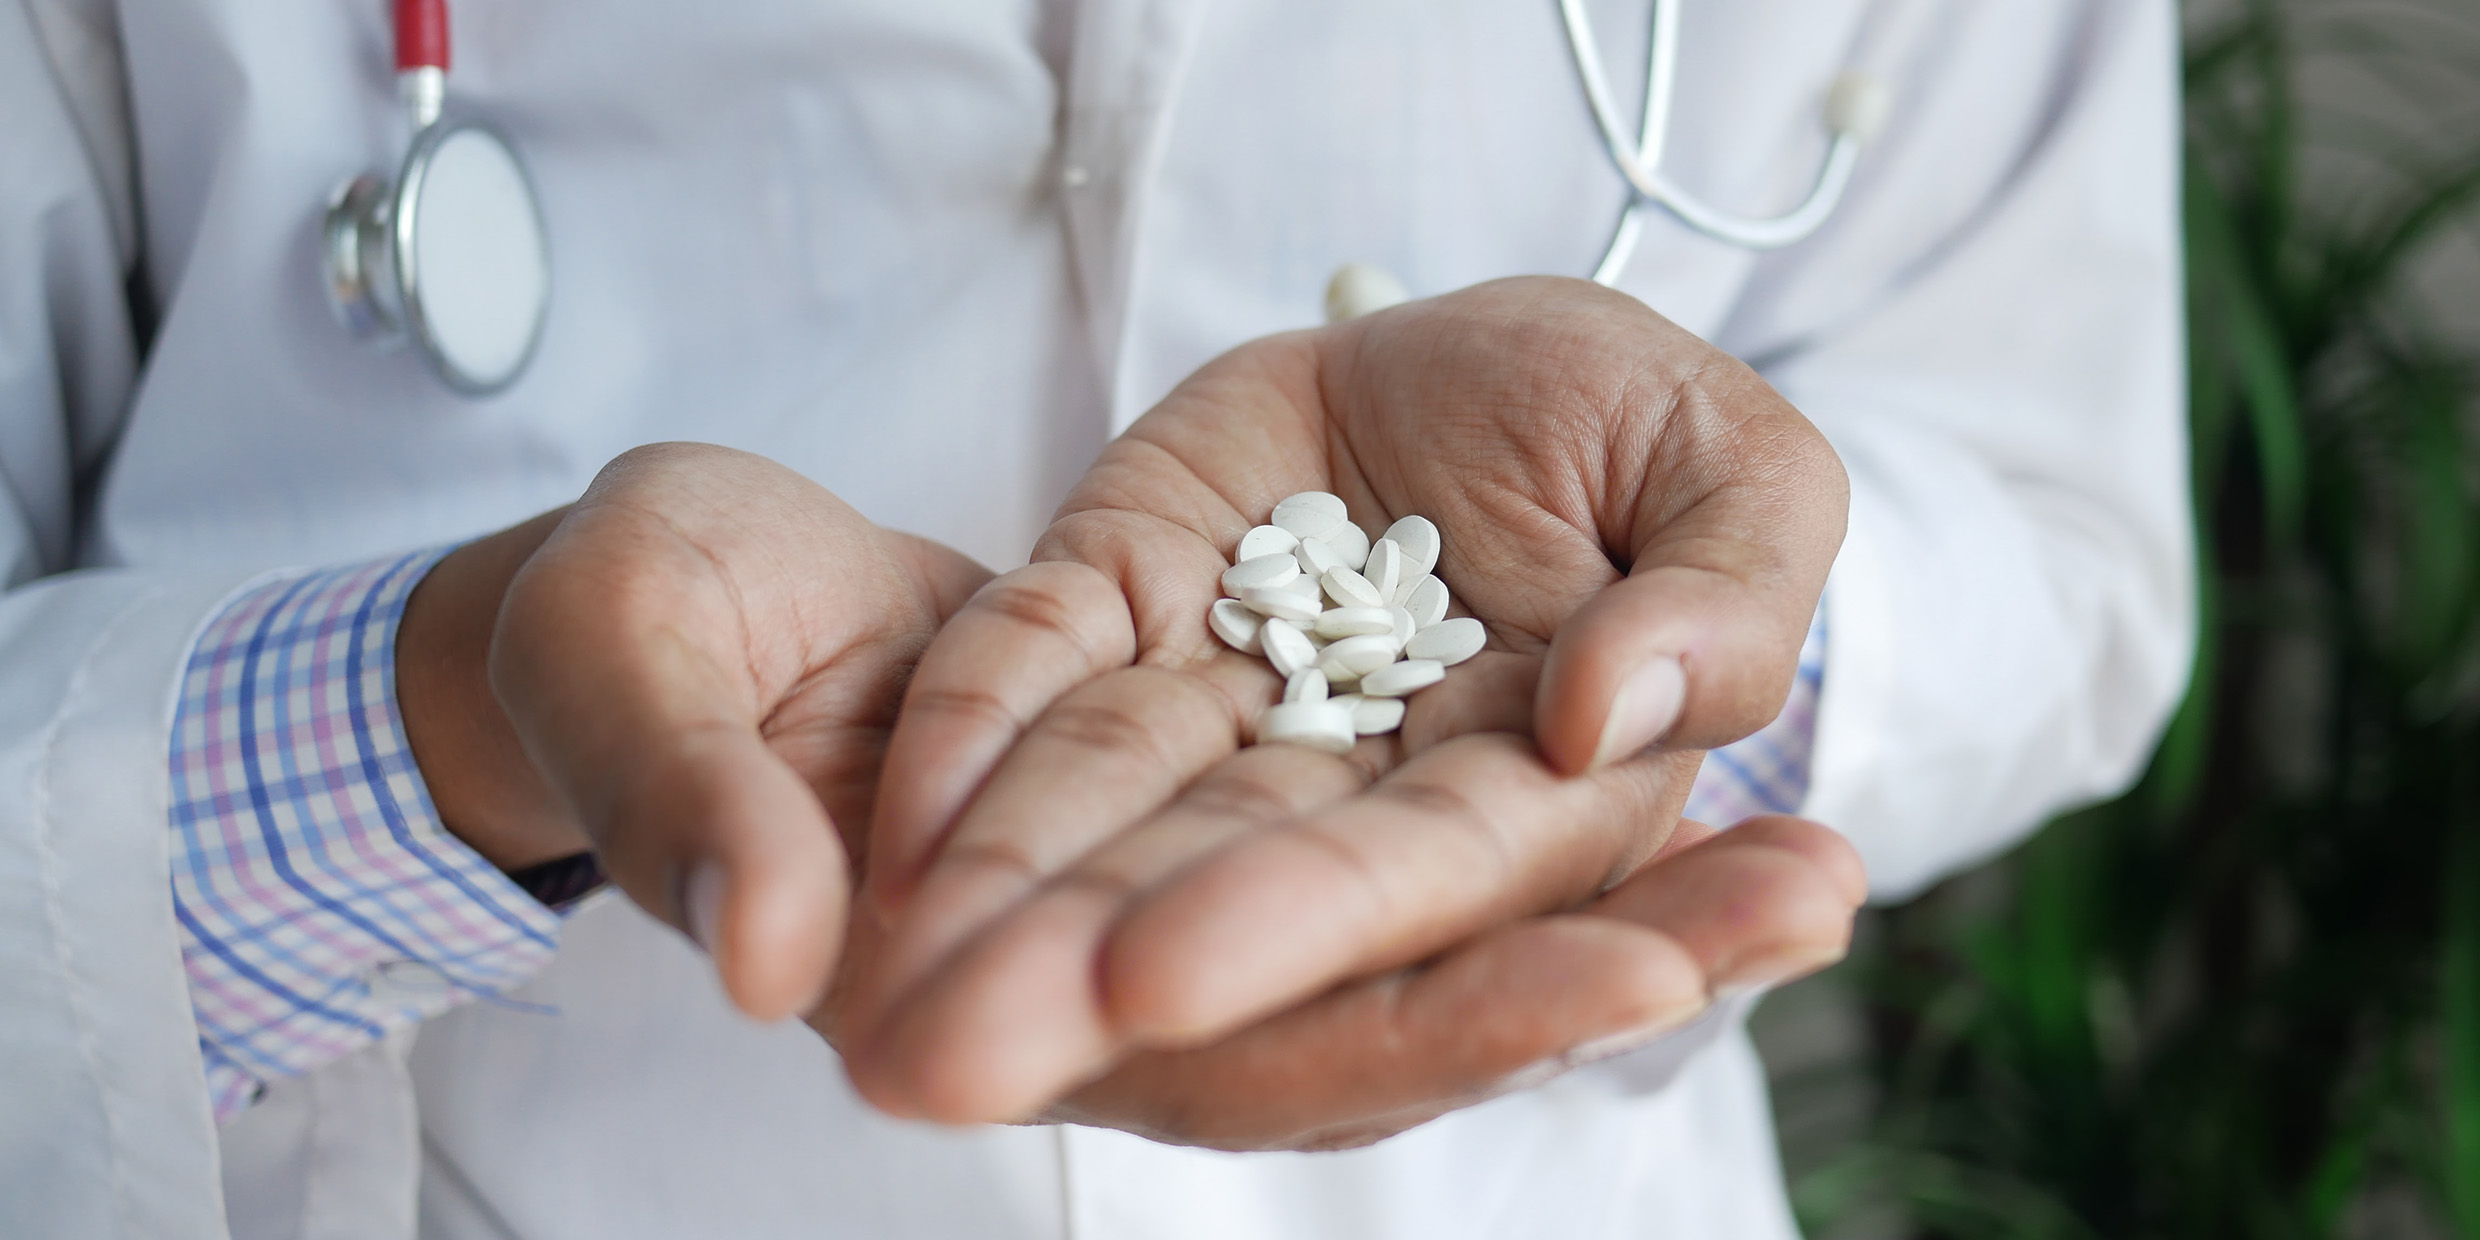 Image of a man wearing a white lab coat holding out a hand filled with white pills